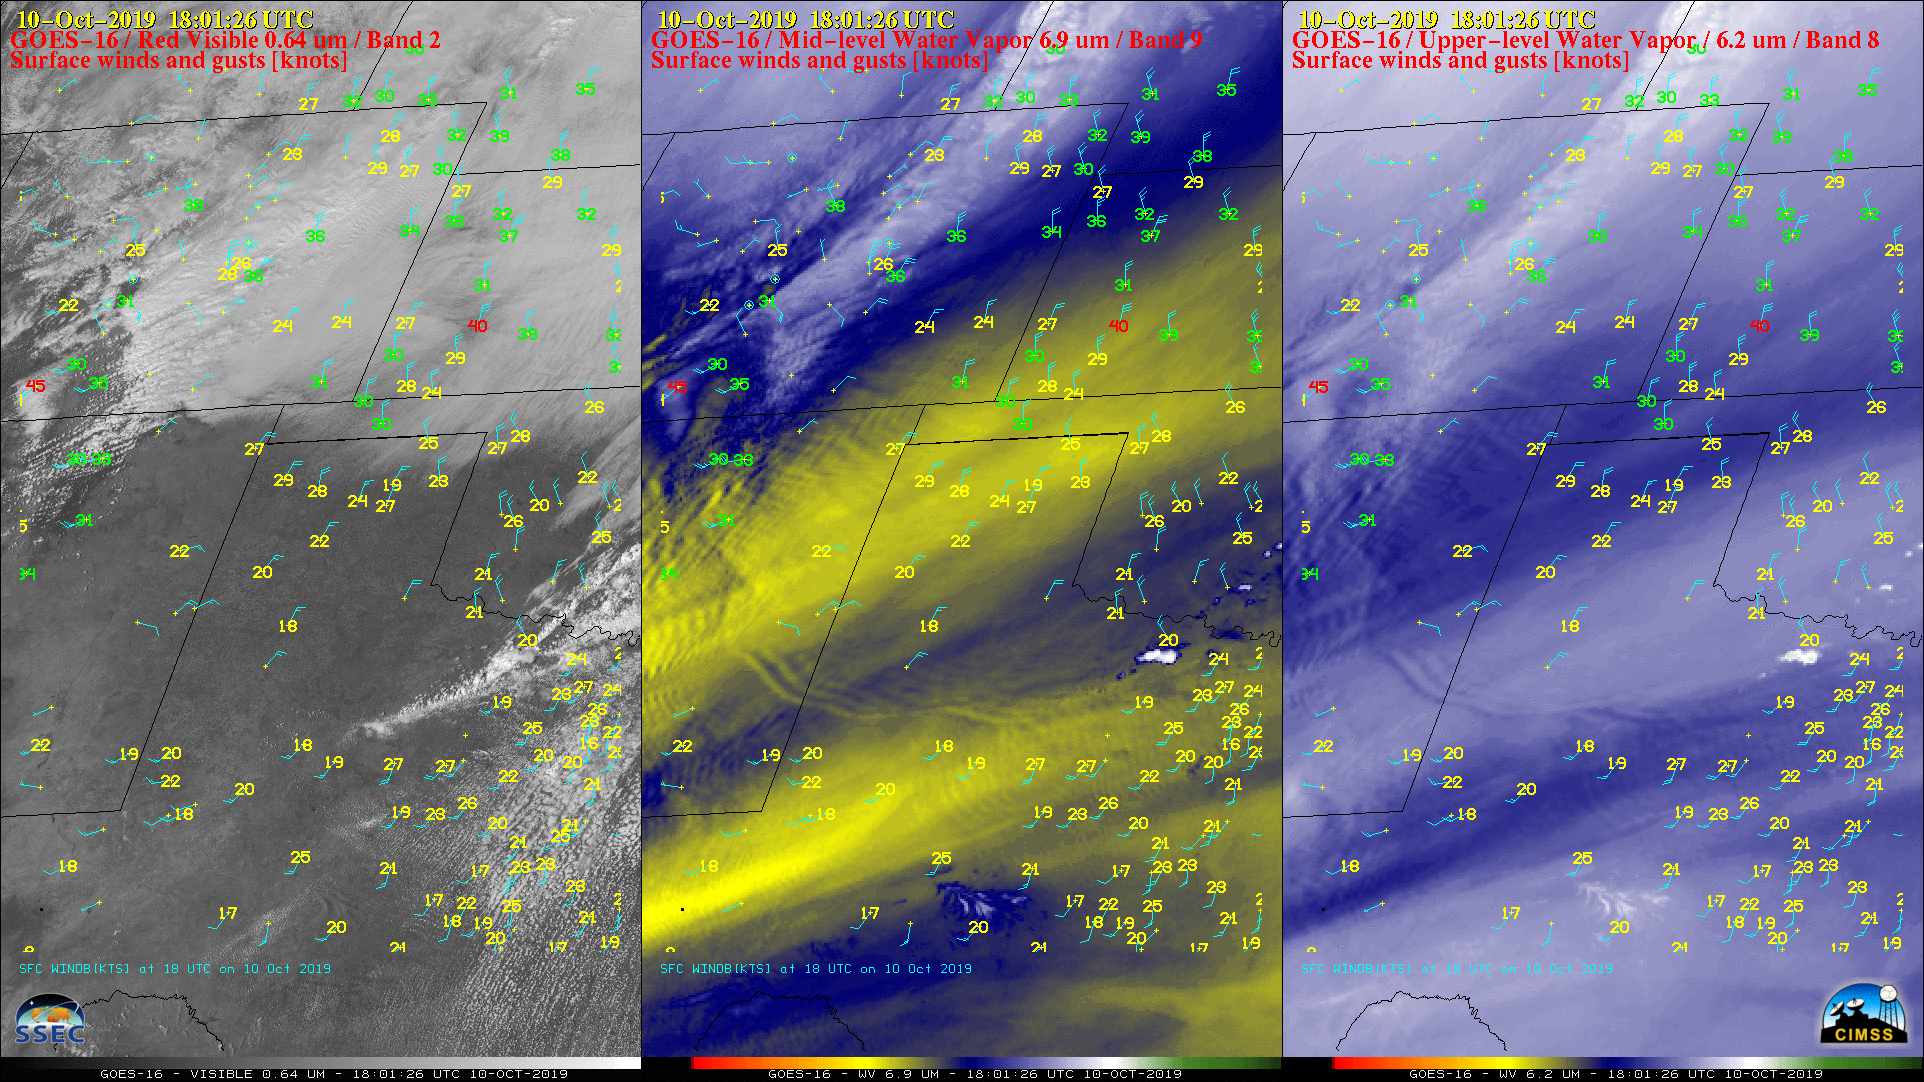 GOES-16 "Red" Visible (0.64 µm, left), Mid-level Water Vapor (6.9 µm, center) and Upper-level Water Vapor (6.2 µm, right) images, with plots of surface wind barbs and gusts in knots [click to play animation | MP4]